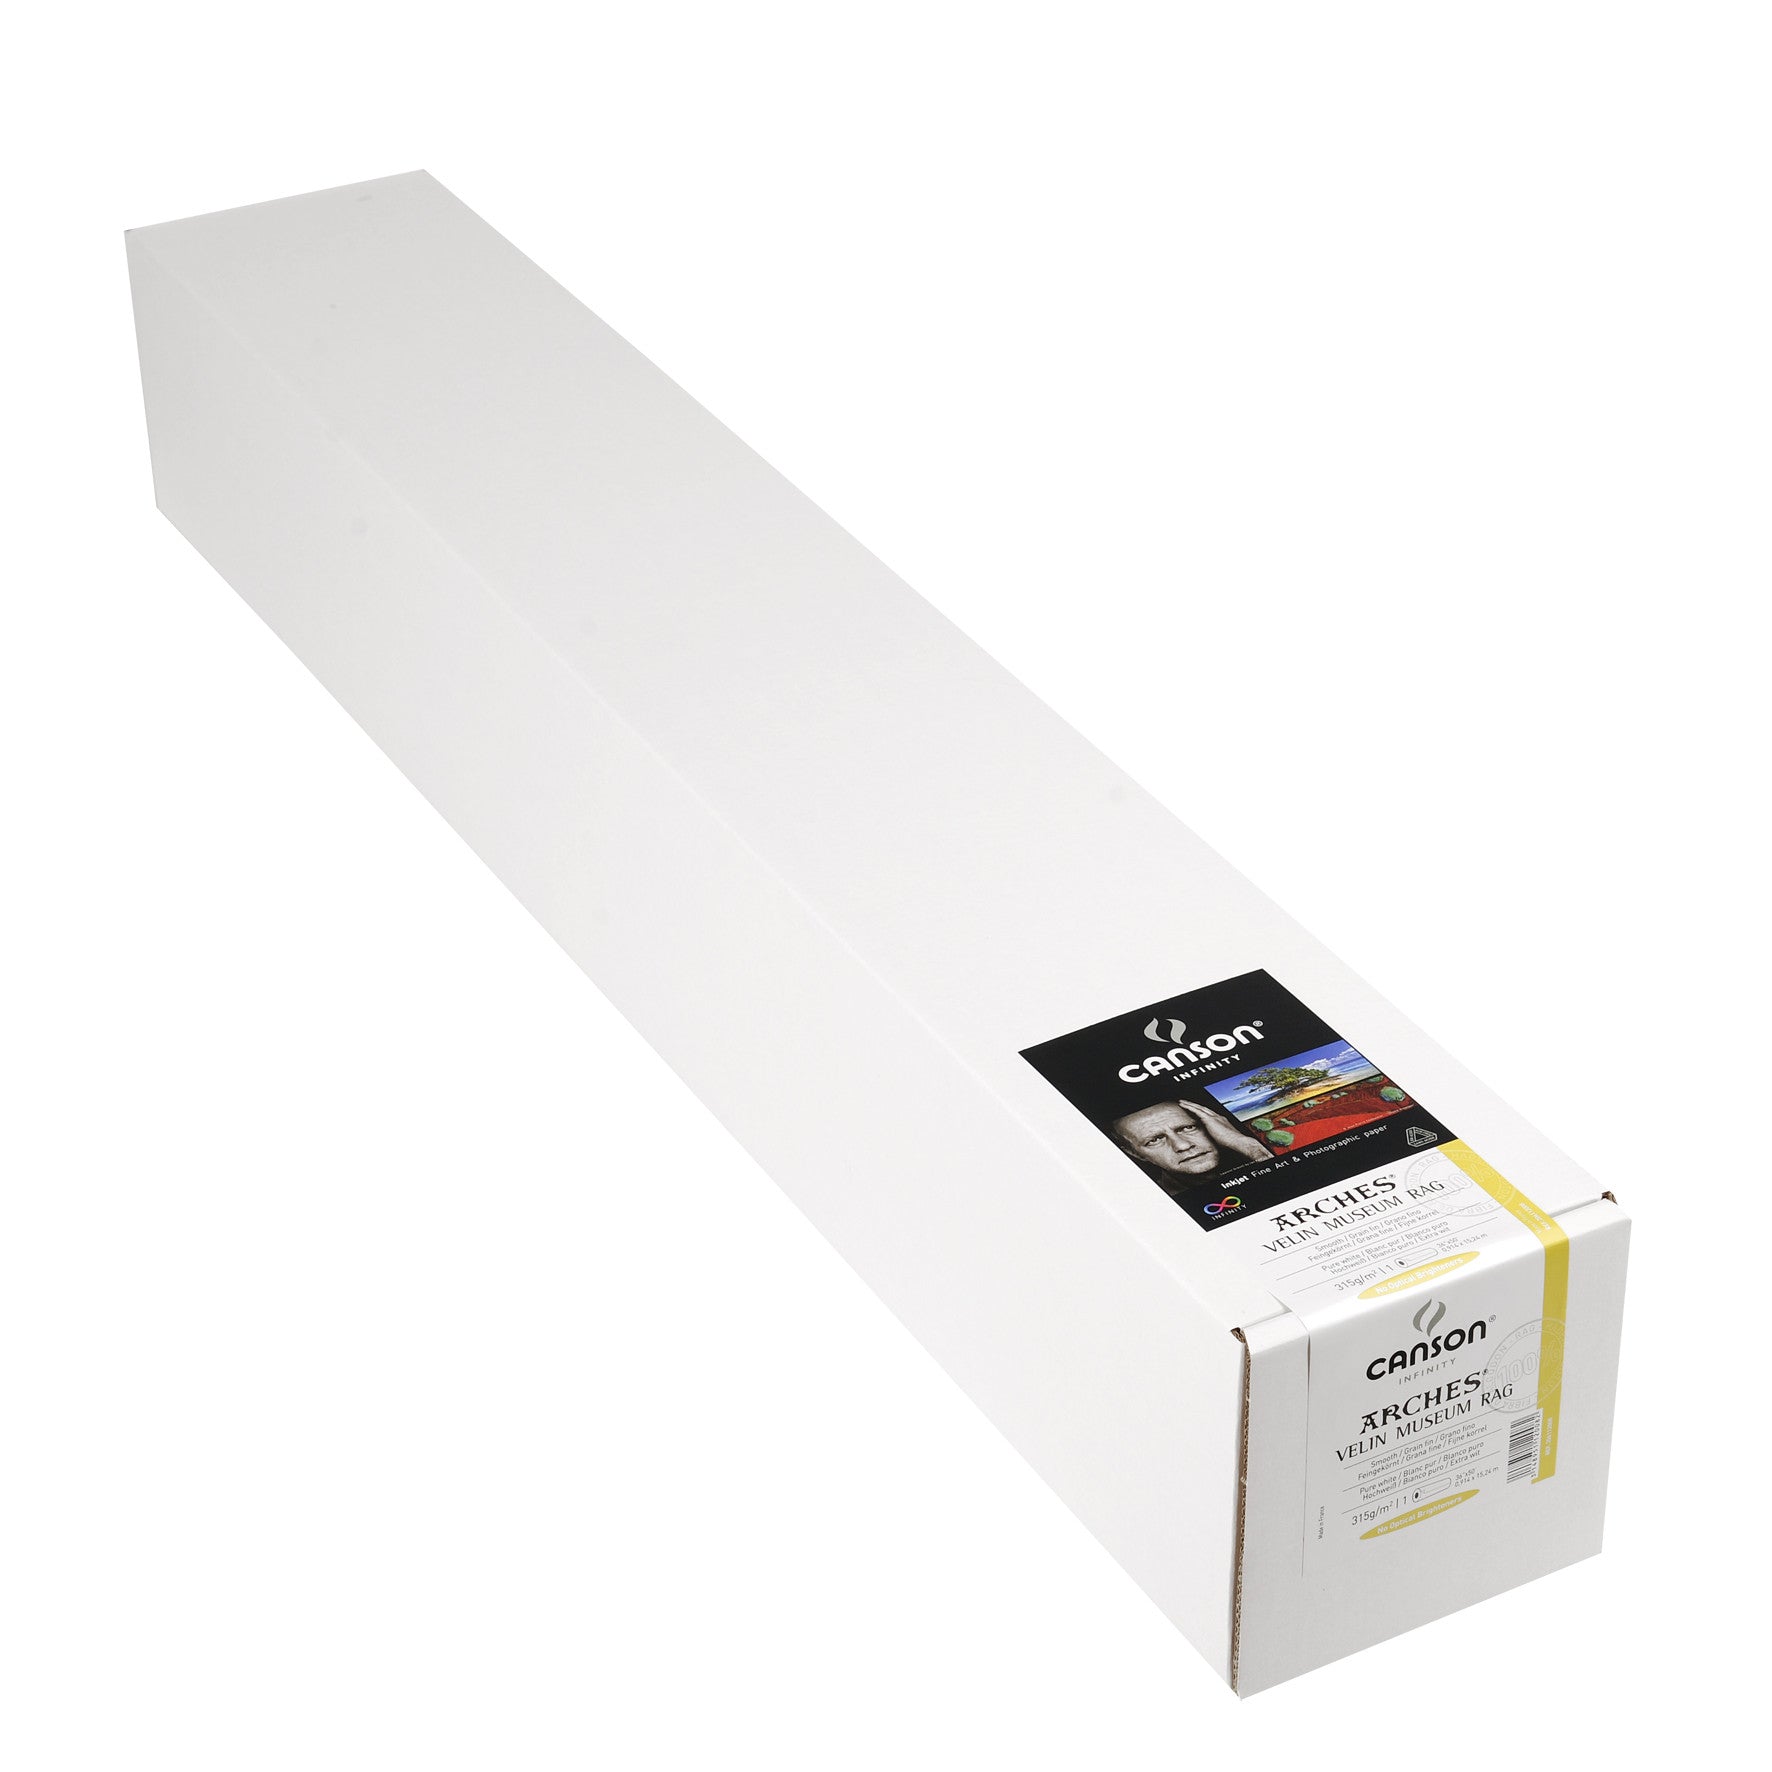 Canson Infinity Velin Museum Rag - 315gsm - 36"x50' roll - Wall Your Photos